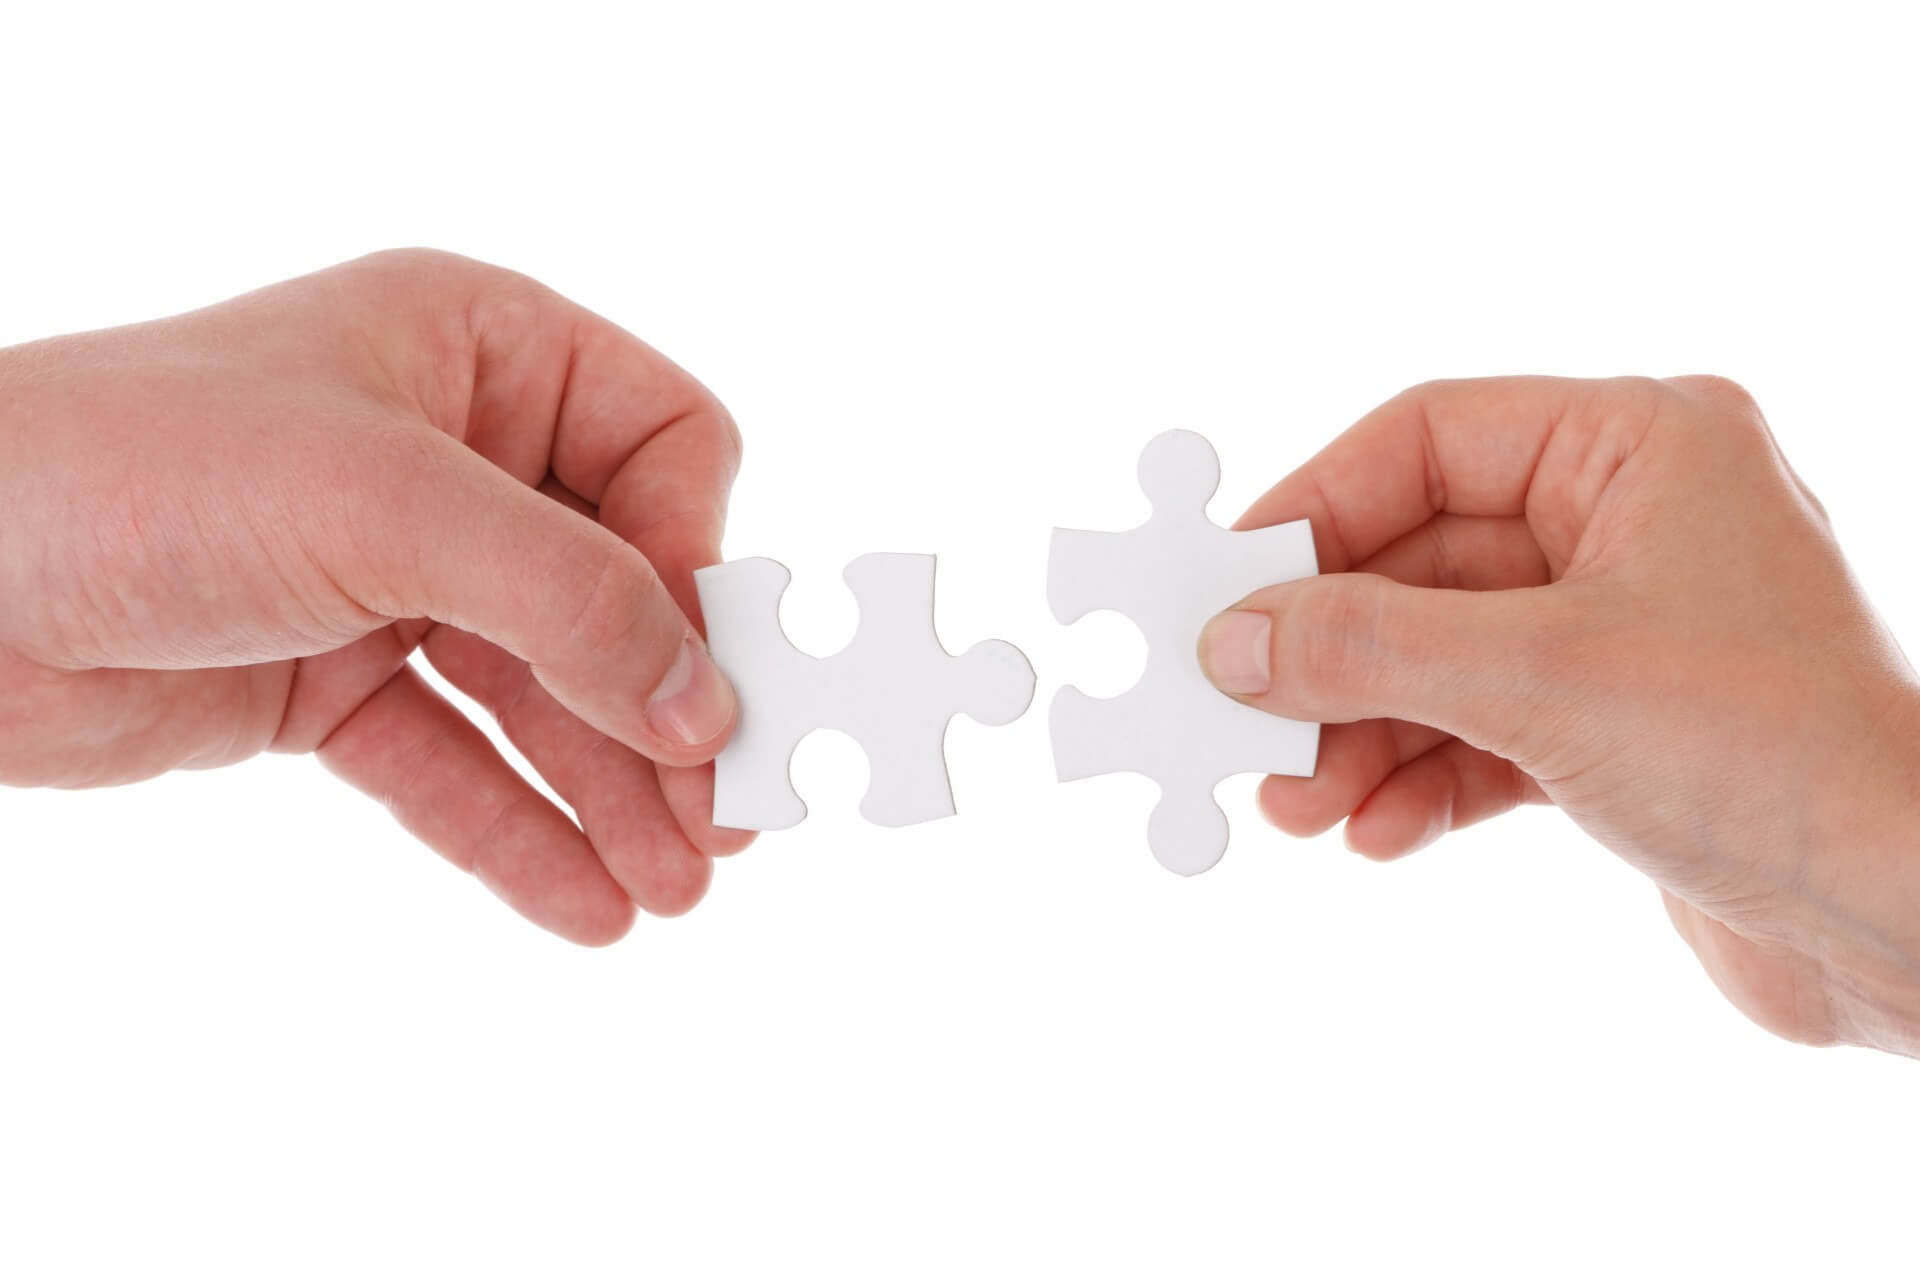 Two hands holding connecting puzzle pieces